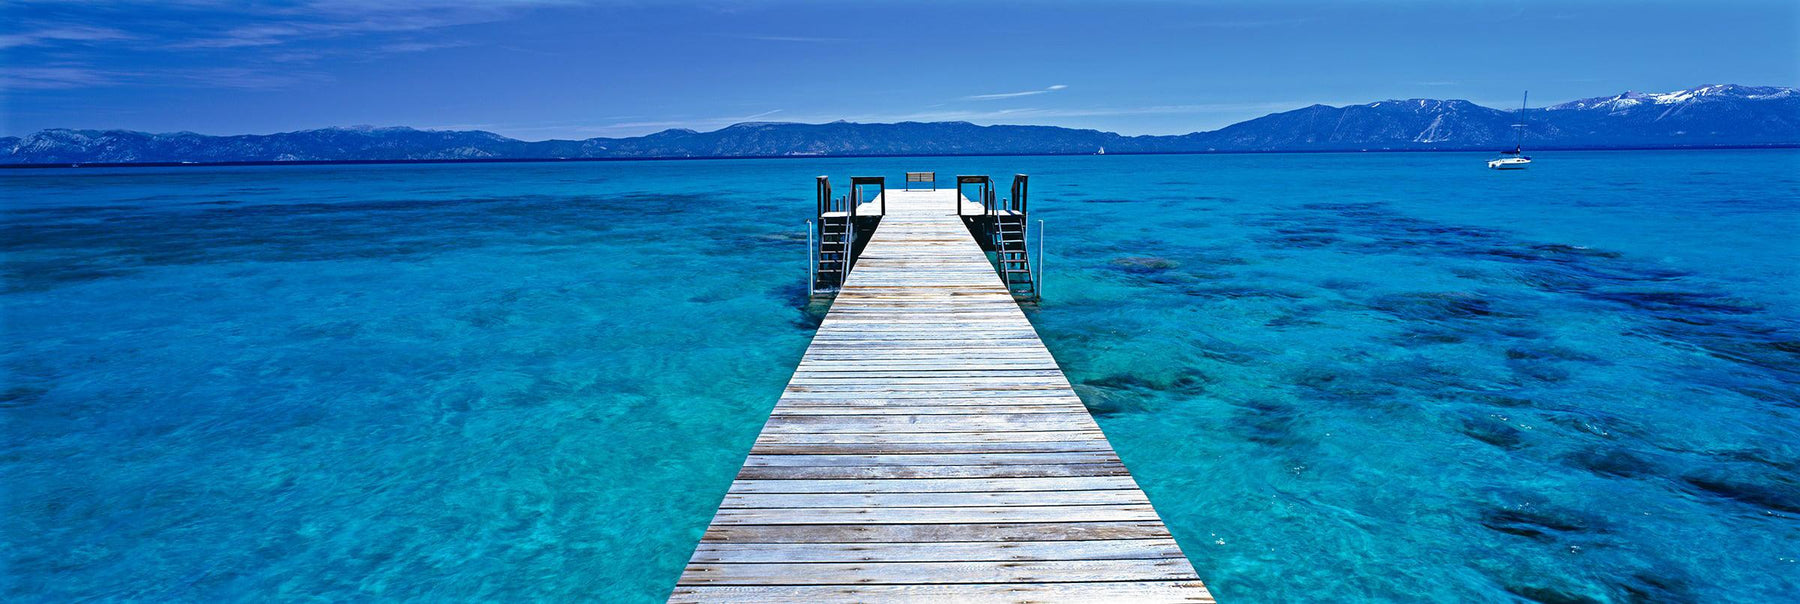 White wooden jetty stretching over the turquoise waters of Lake Tahoe California